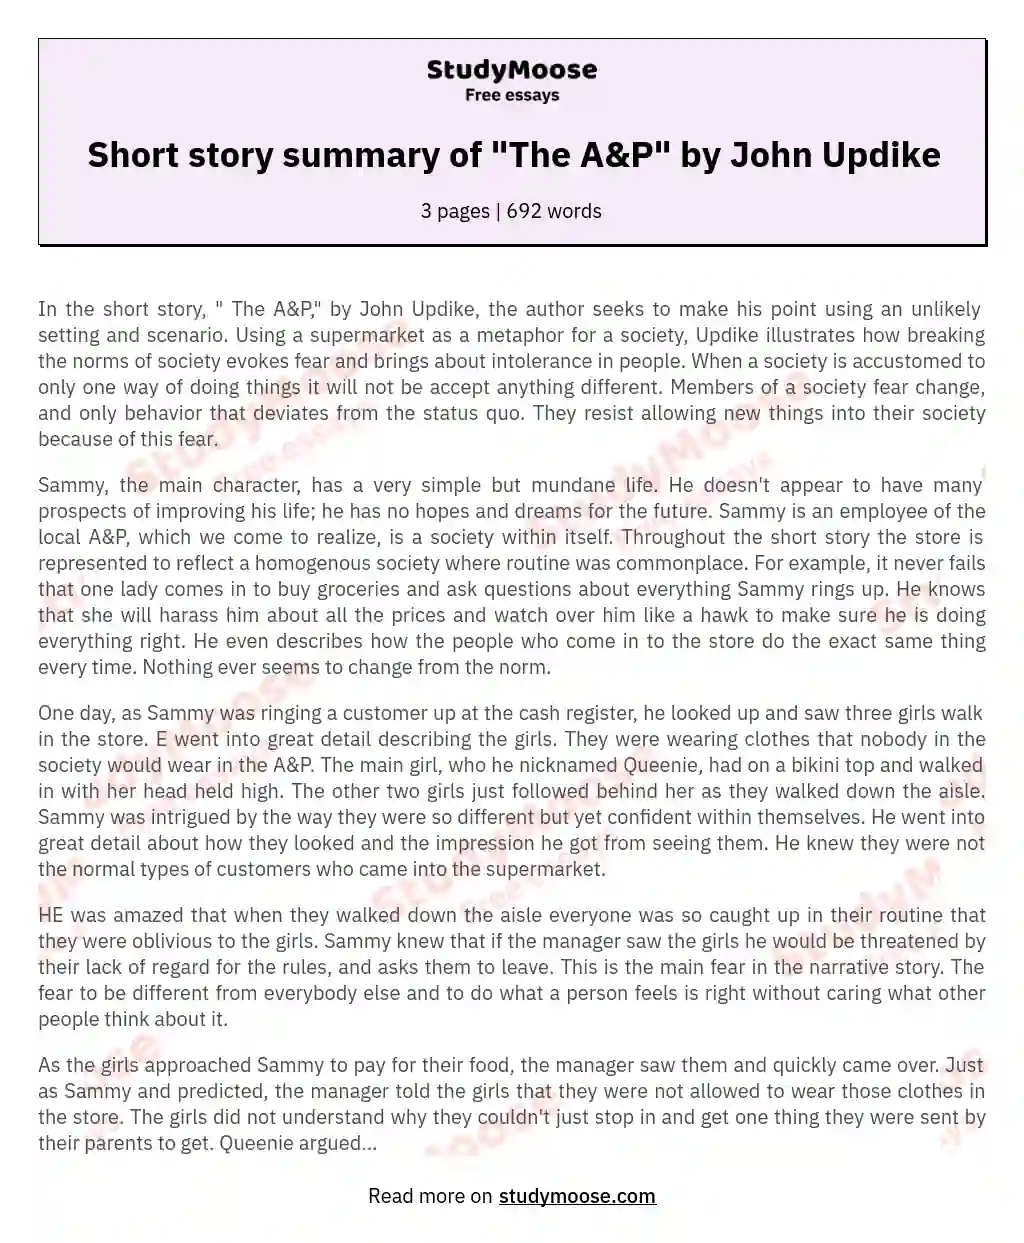 Short story summary of "The A&P" by John Updike